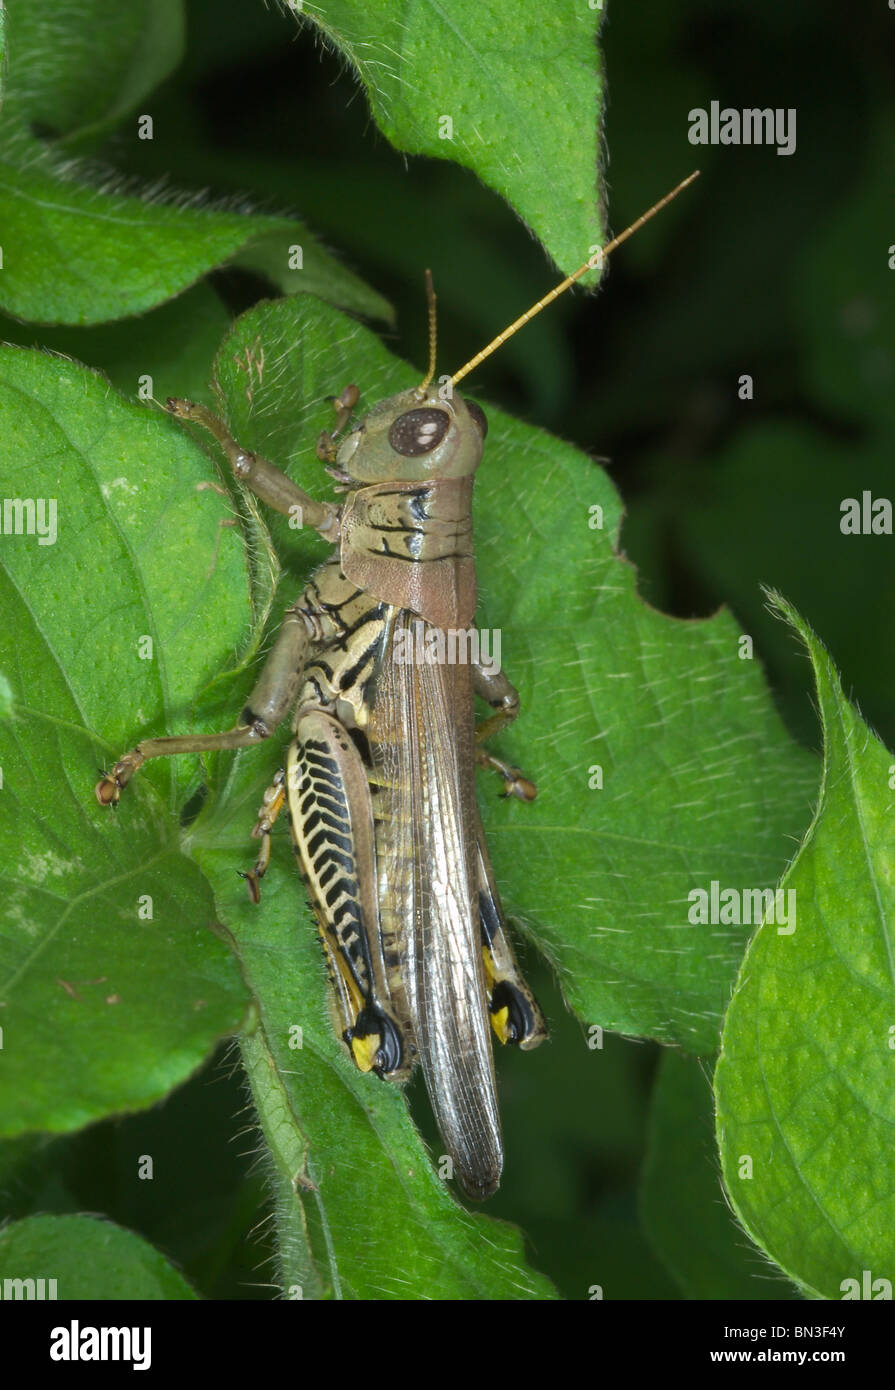 Differential Grasshopper, Melanoplus differentialis, on a plant, close-up Stock Photo